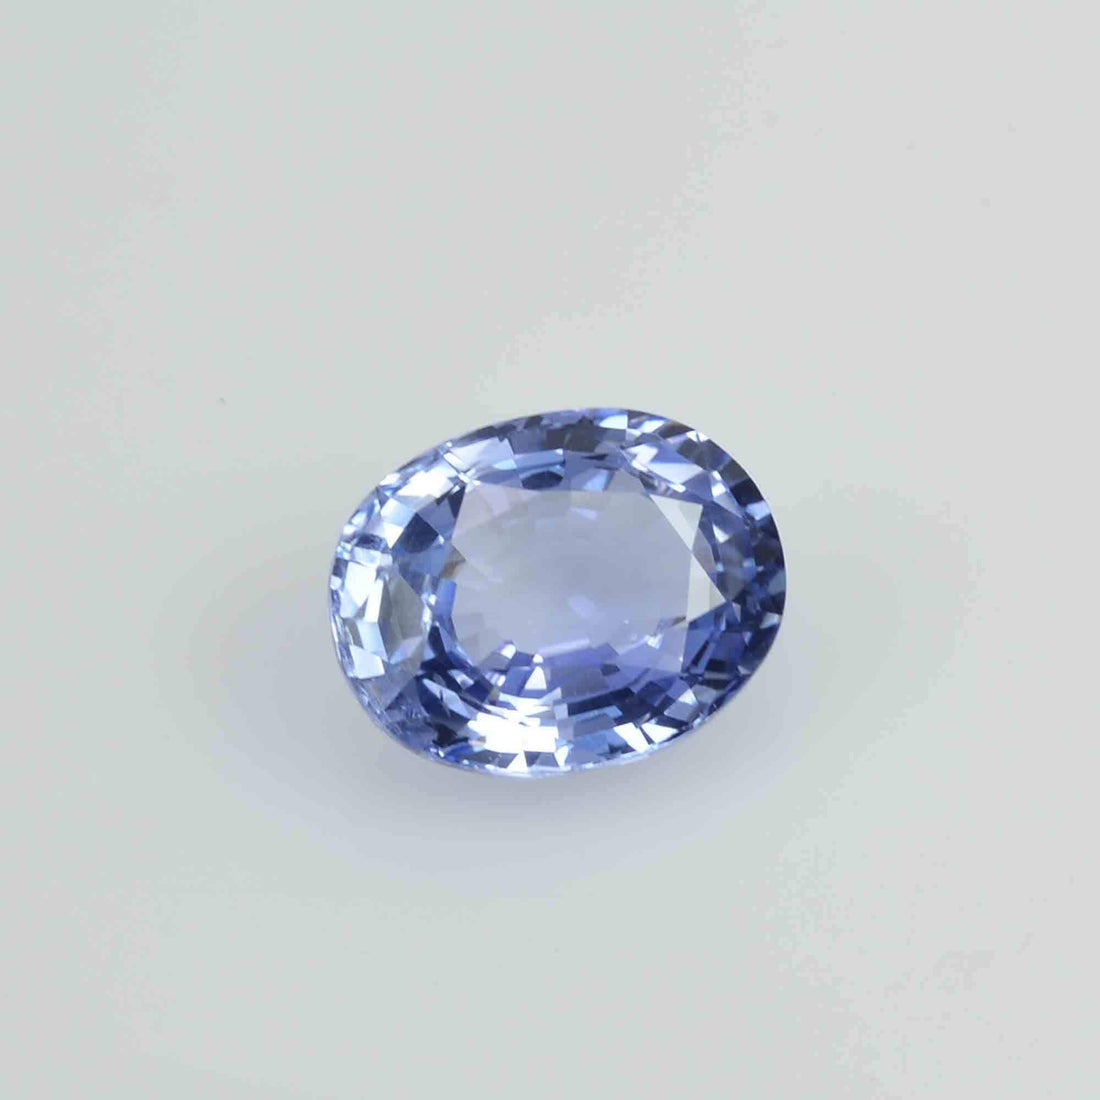 2.51 cts Unheated Natural Blue Sapphire Loose Gemstone Oval Cut Certified